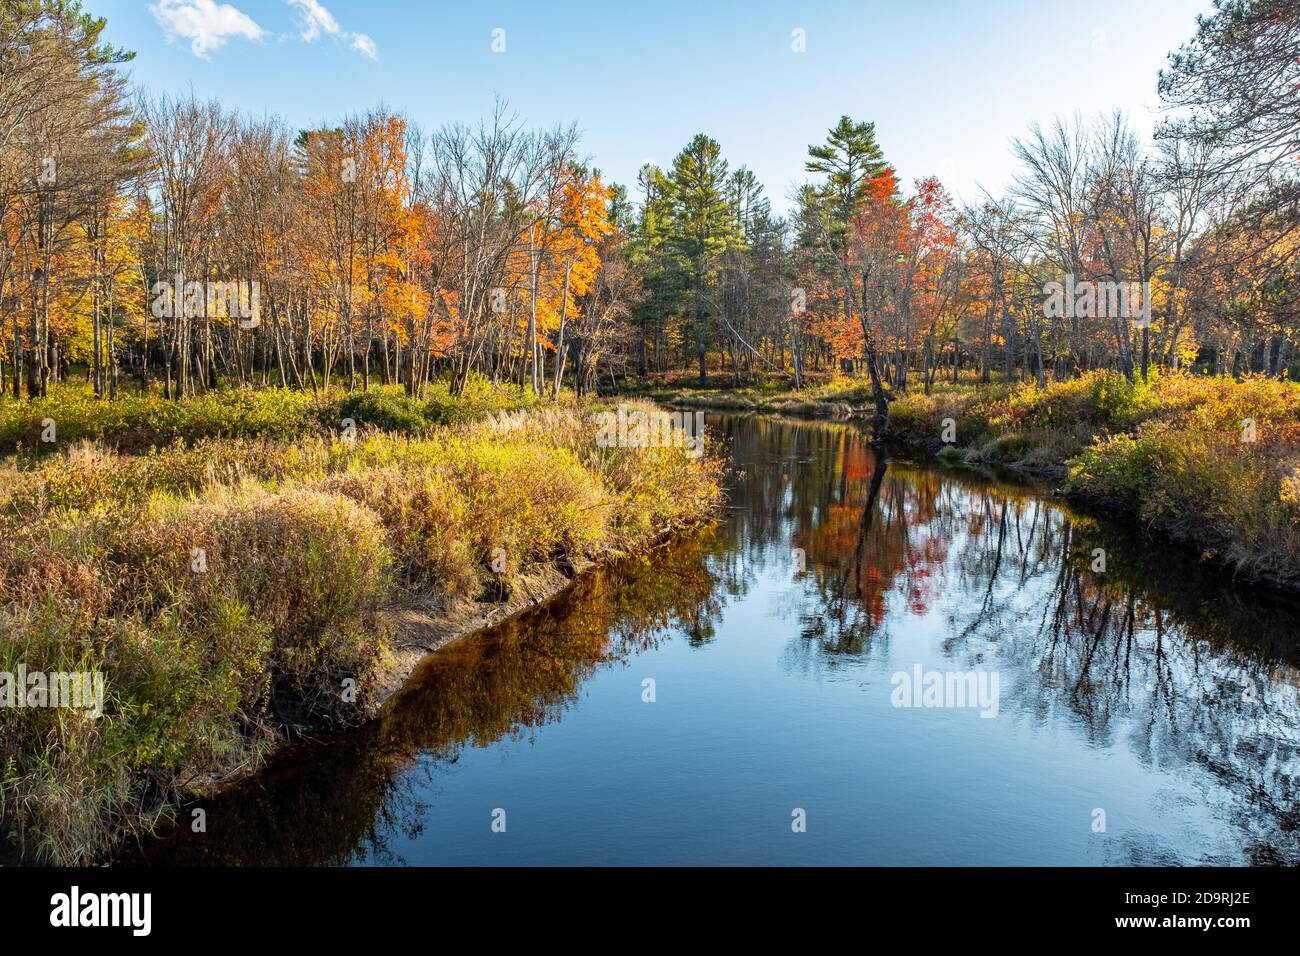 The Millers River in the Lake Dennison Recreation area in Winchendon, Massachusetts Stock Photo